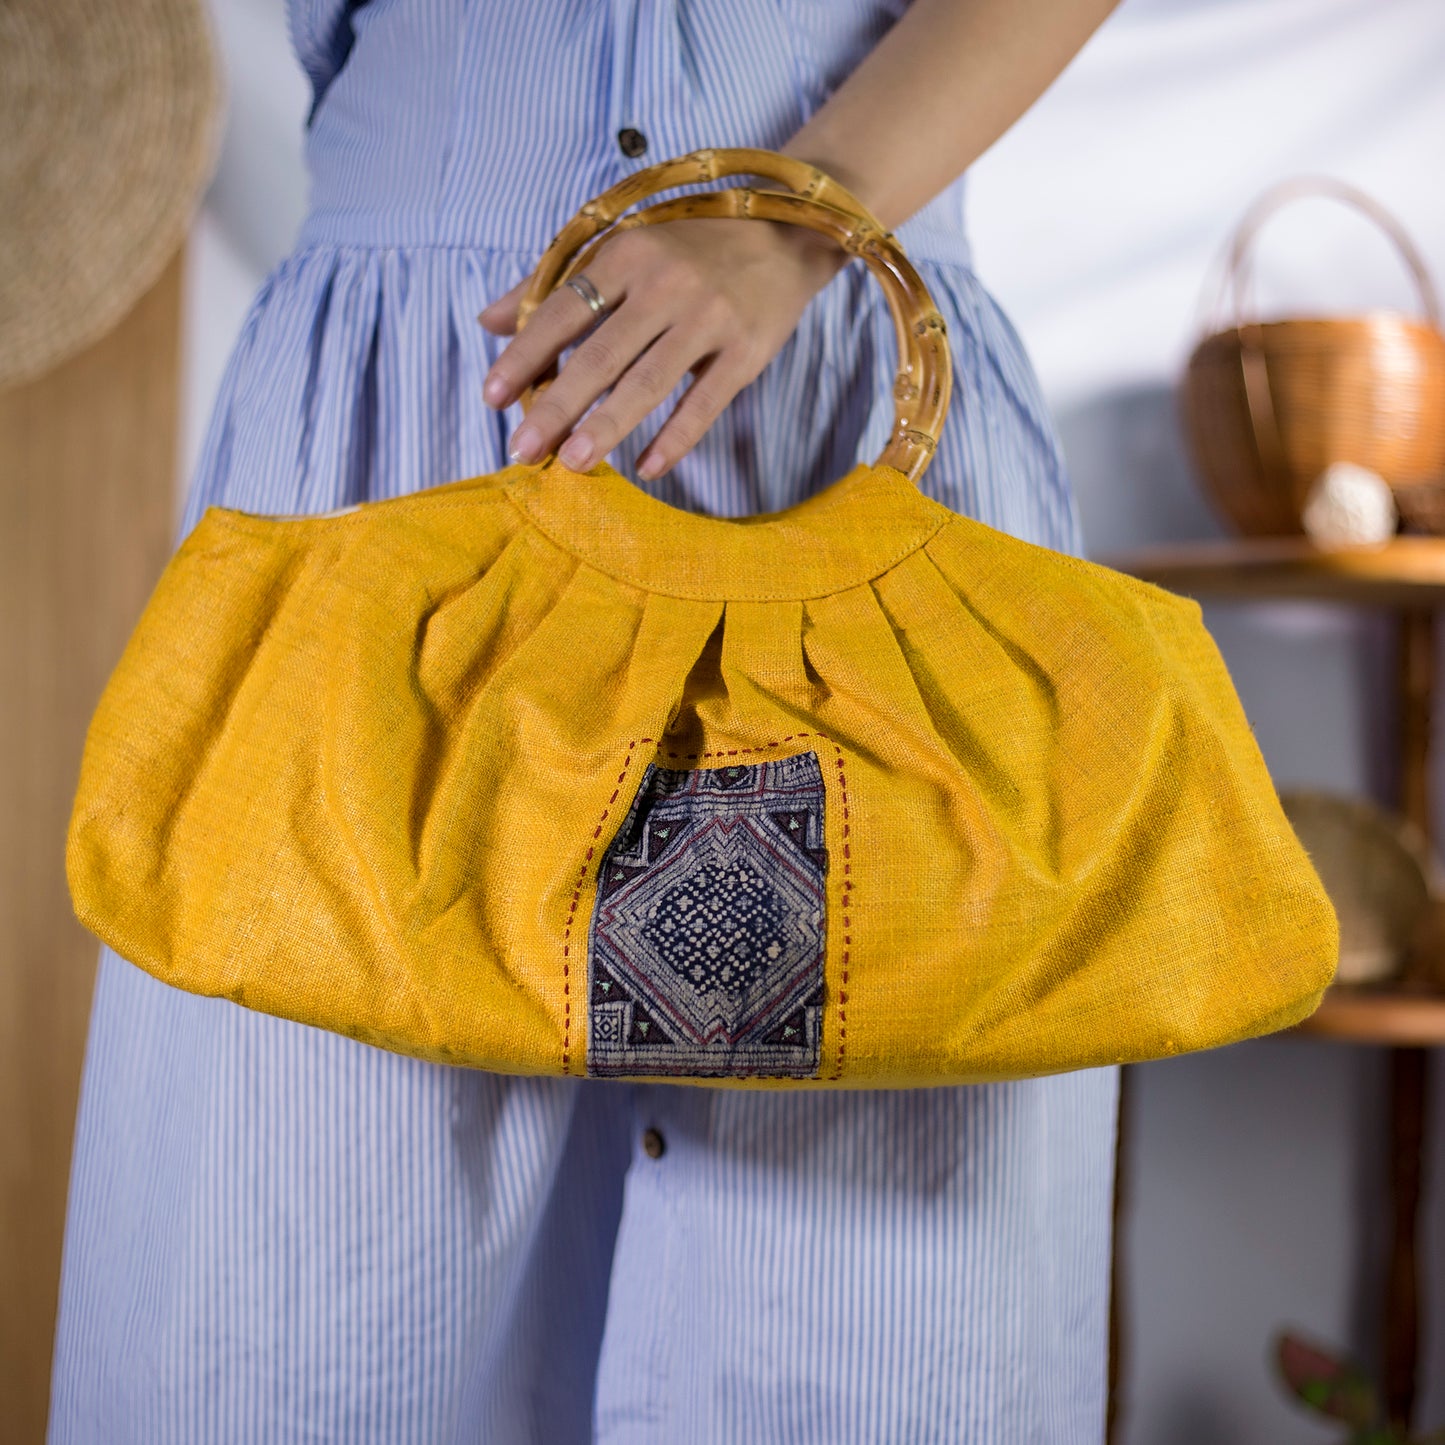 Bamboo handle bag, natural hemp in YELLOW with vintage patch